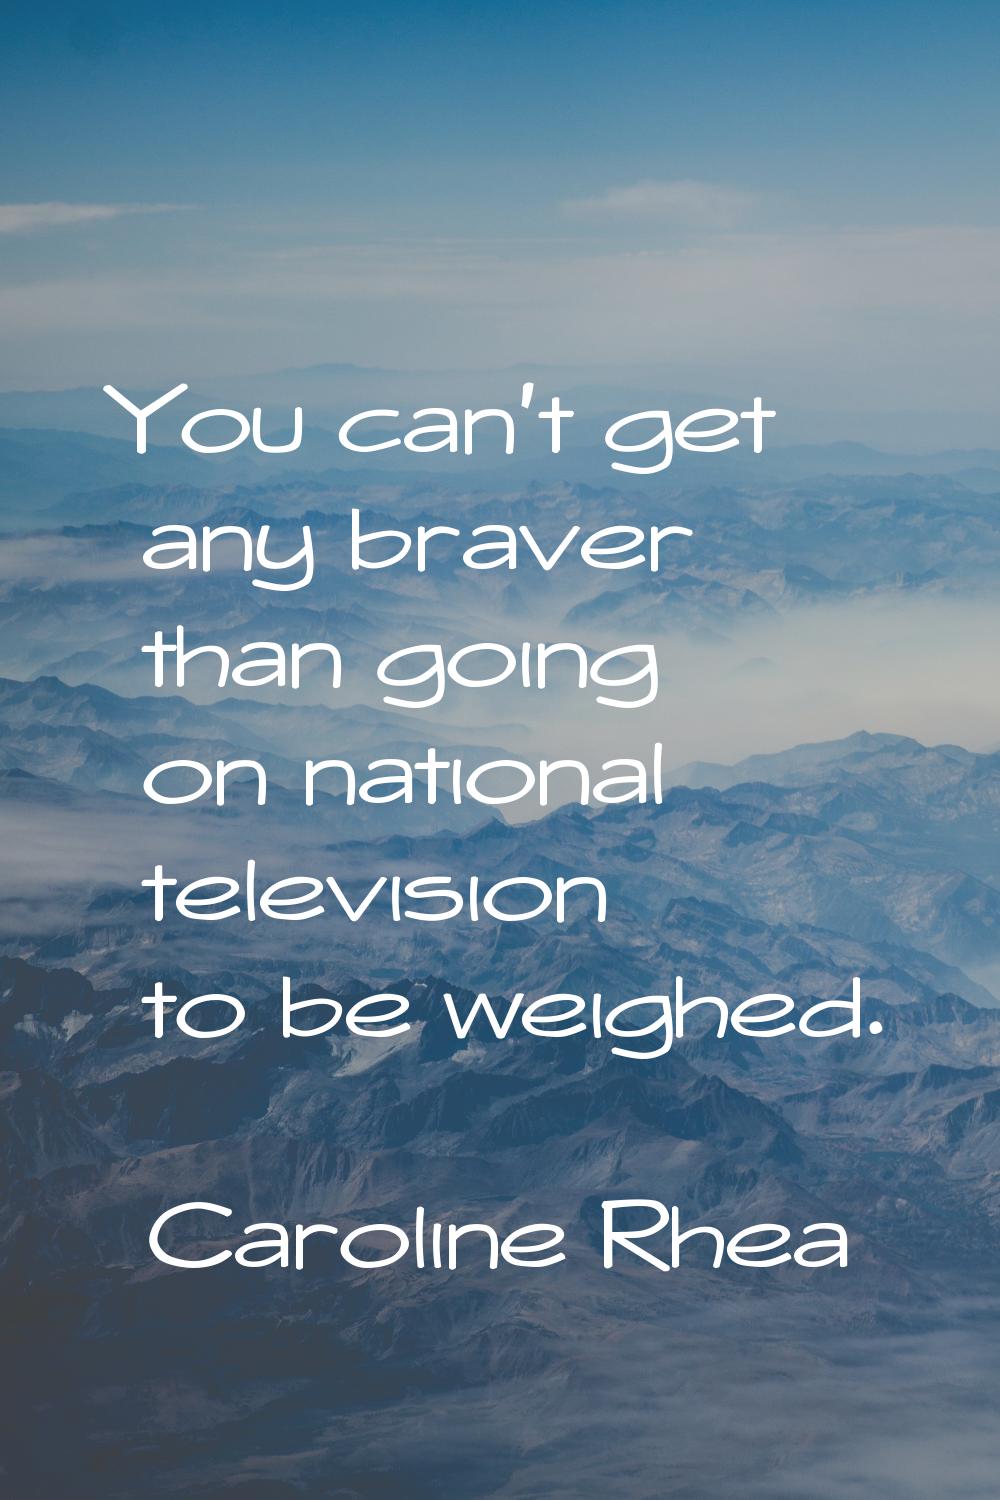 You can't get any braver than going on national television to be weighed.